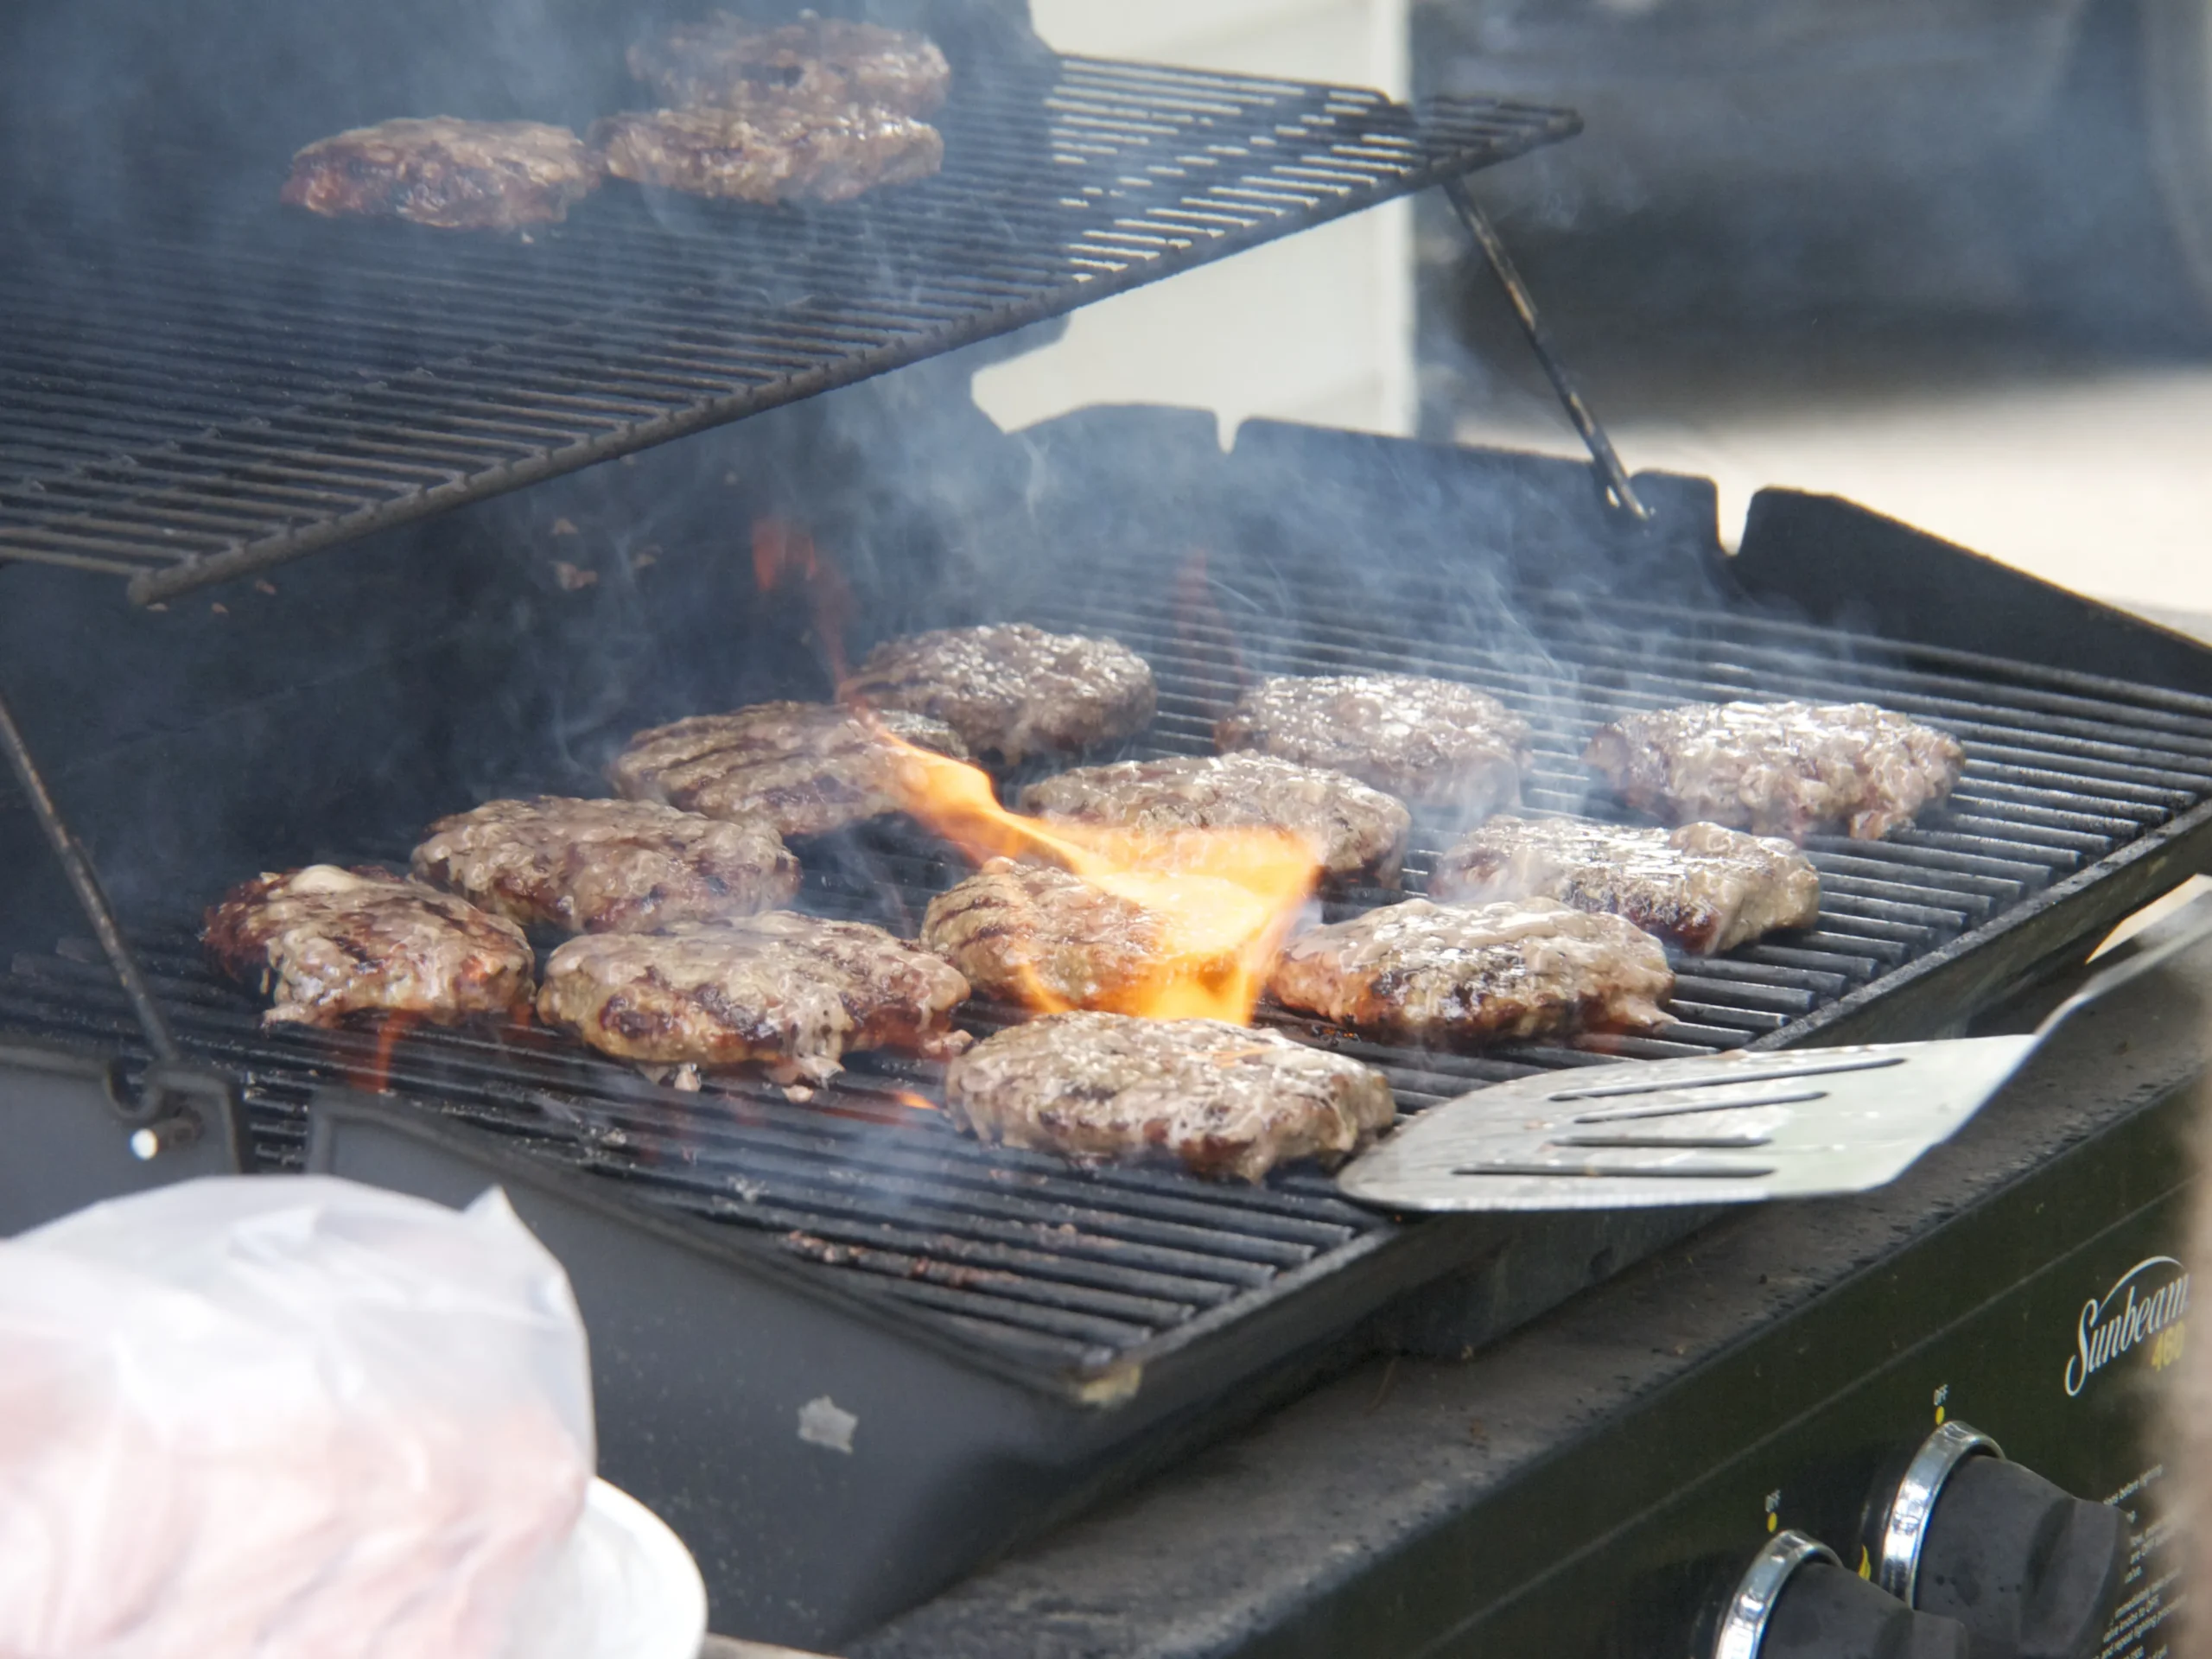 Tips for Enjoyable Rainy Day Grilling